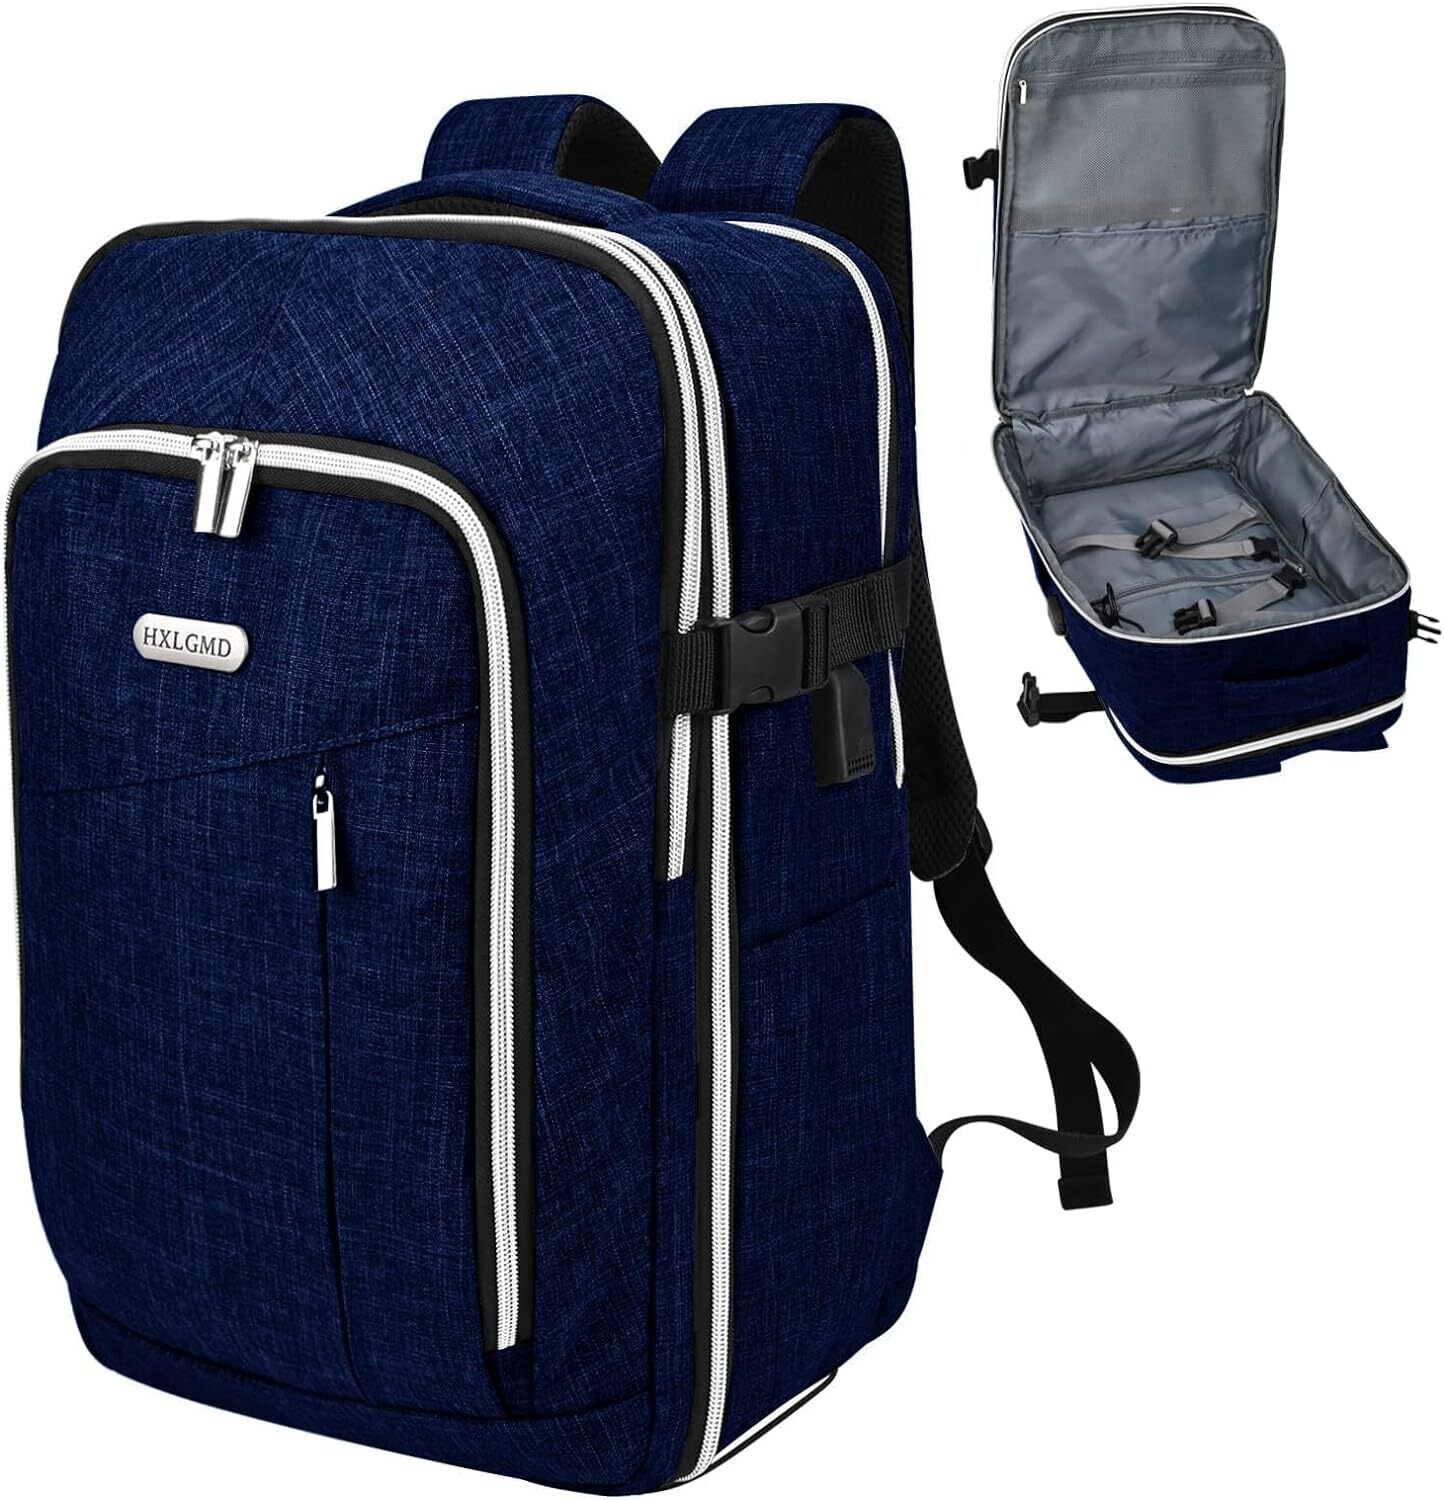 Personal Item Travel Backpack for Women Men, Flight Approved Carry Navy Blue 